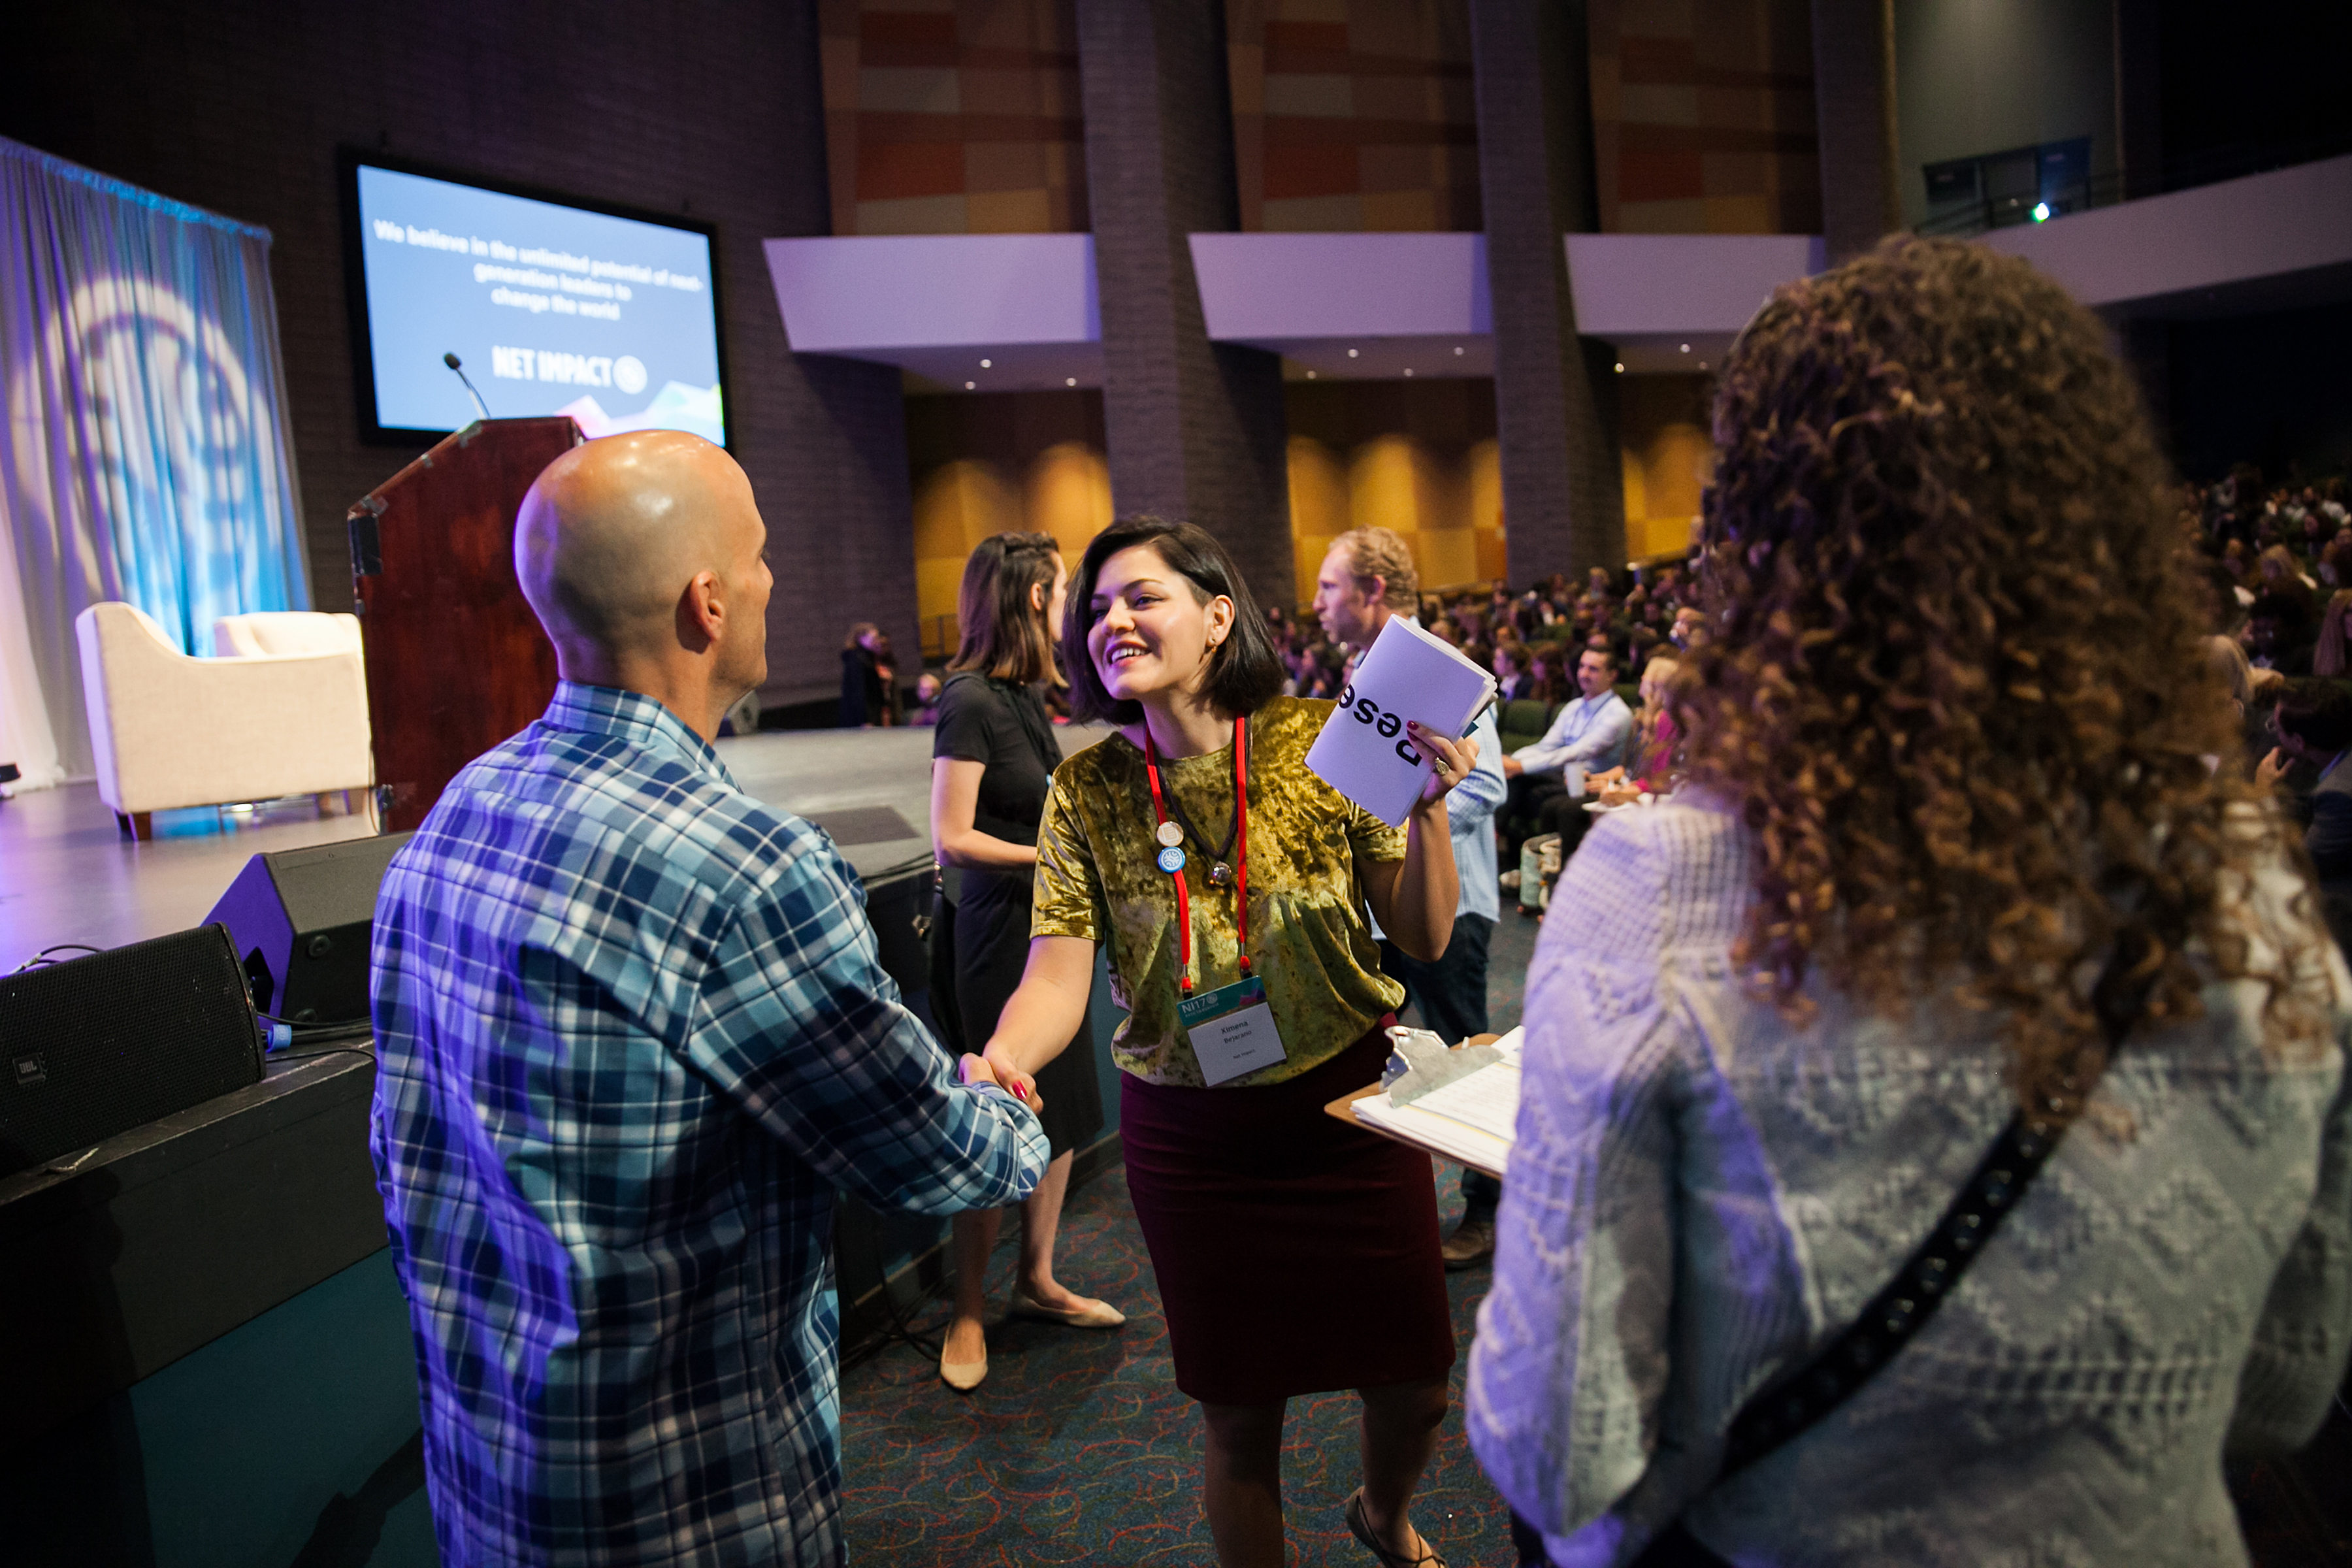 Meeting and networking with conference speakers and fellow attendees is one of the key benefits of attending the 2018 Net Impact Conference.